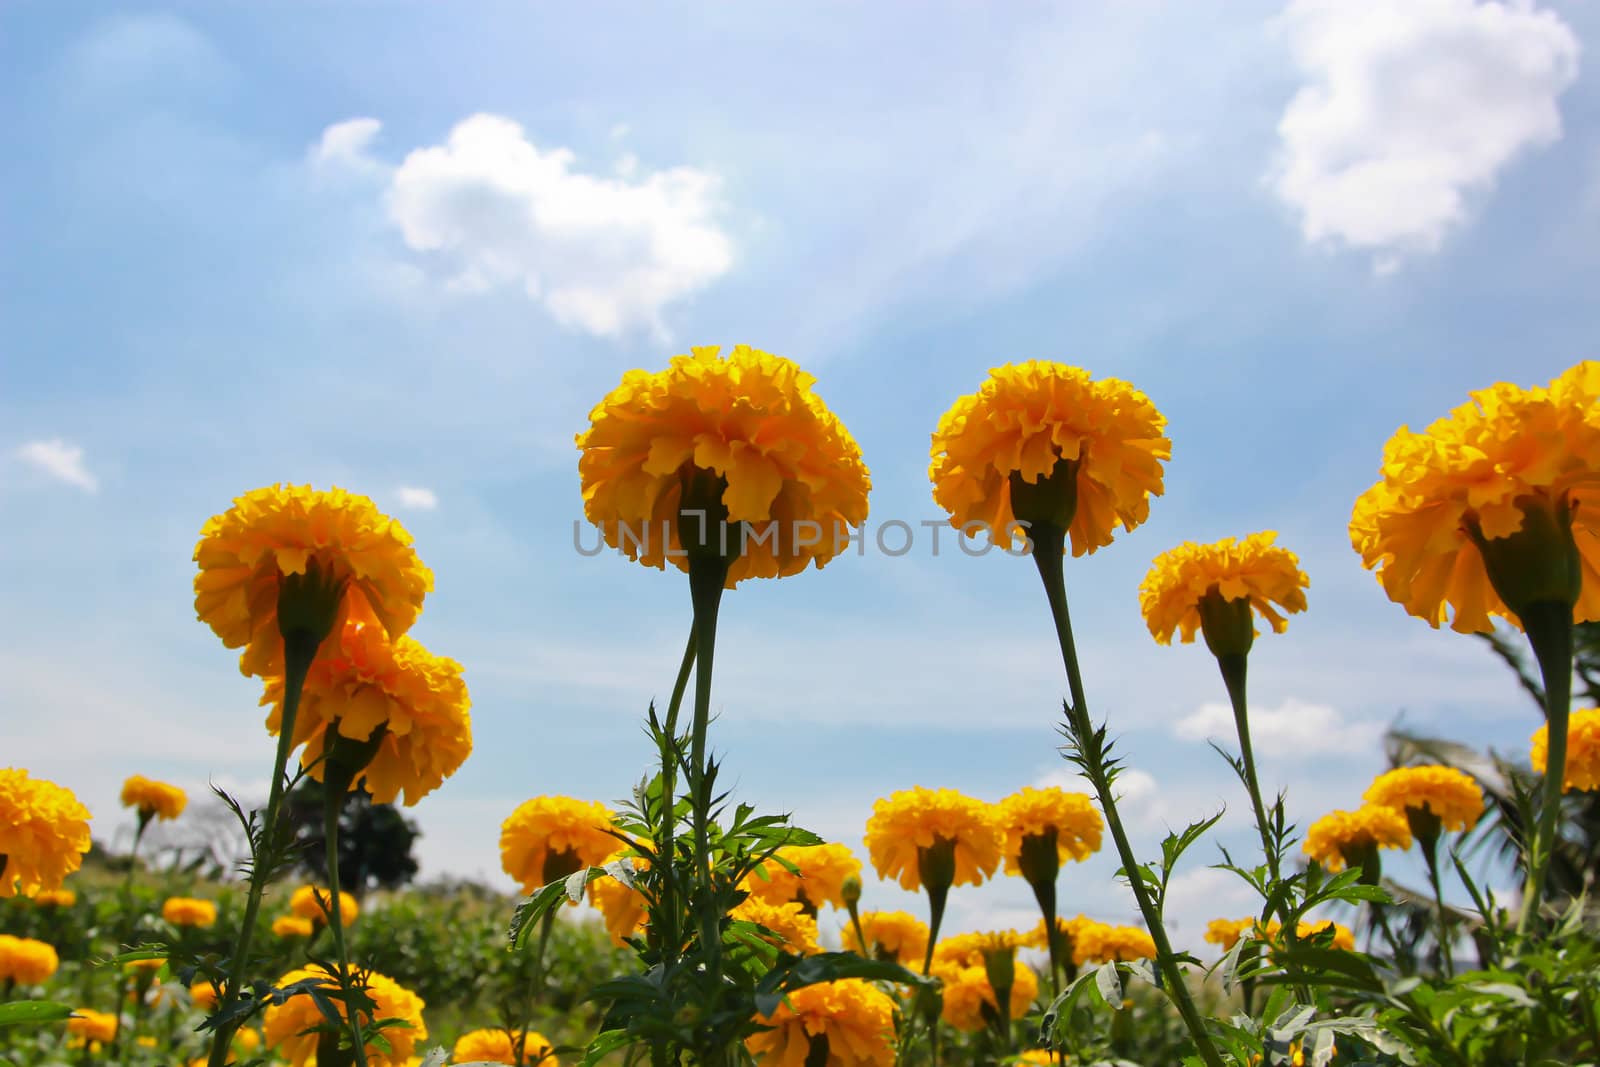 Marigold on the background of blue sky by bajita111122